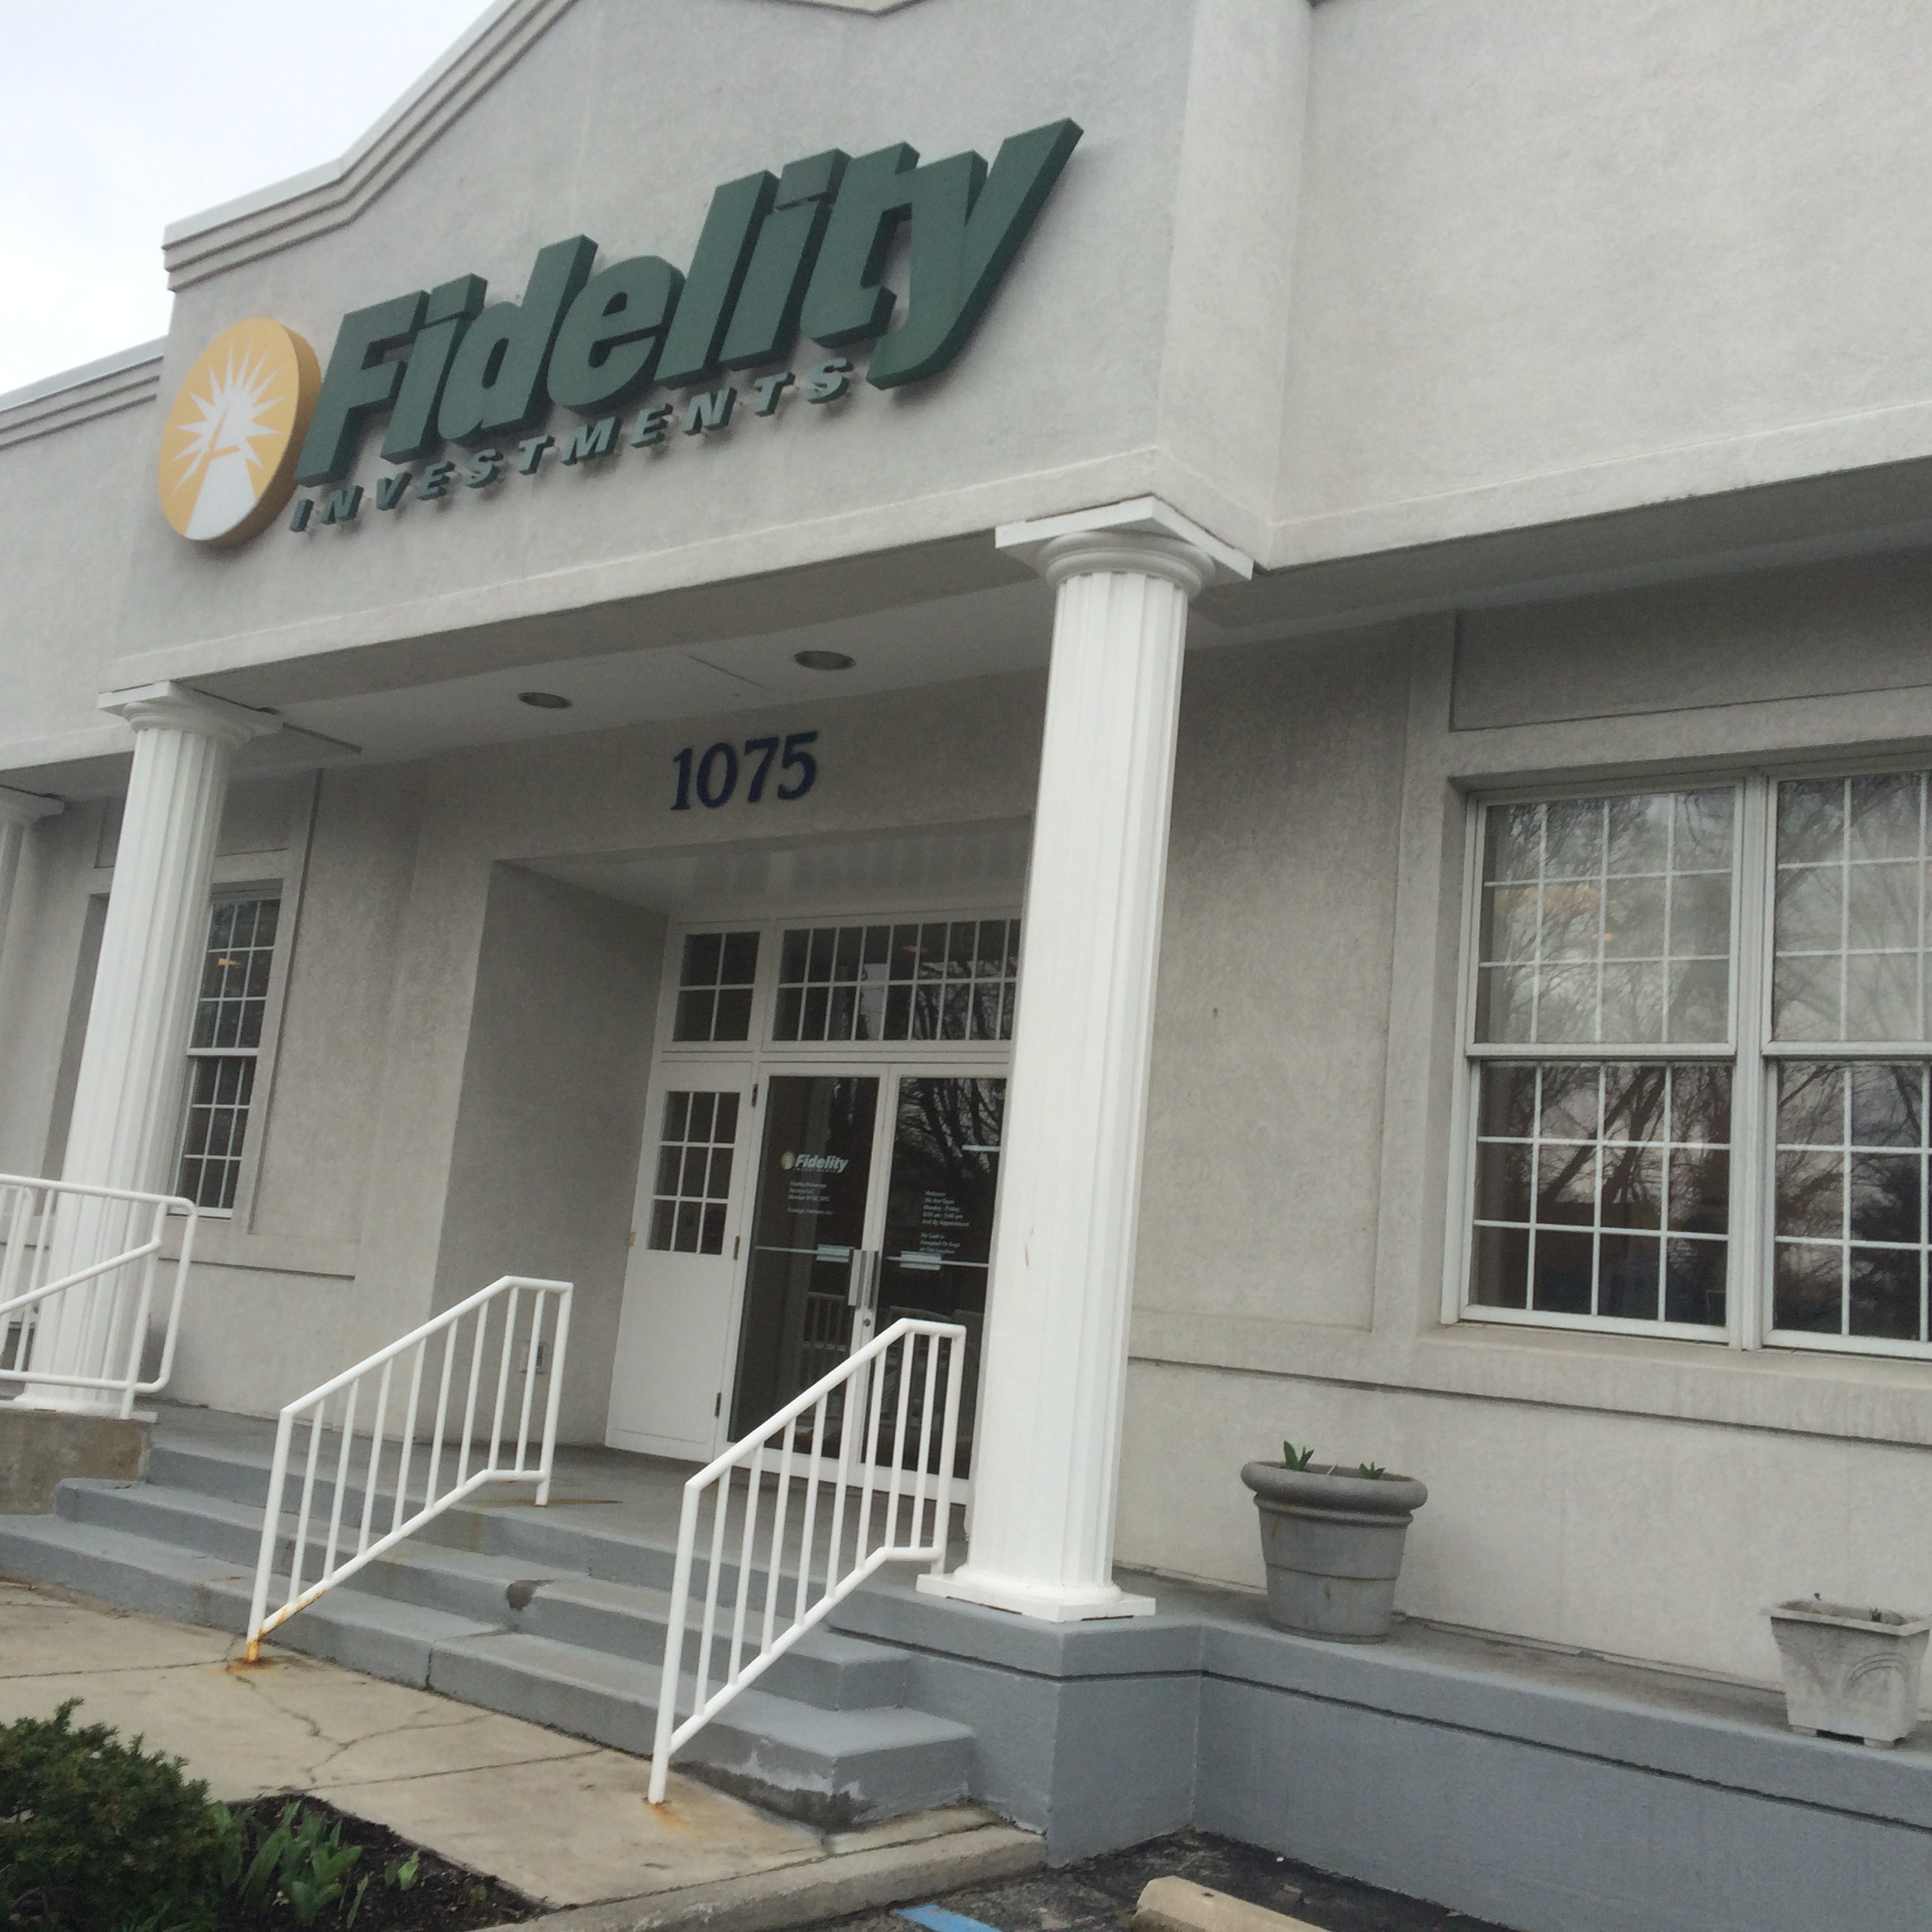 Fidelity Investments Storefront